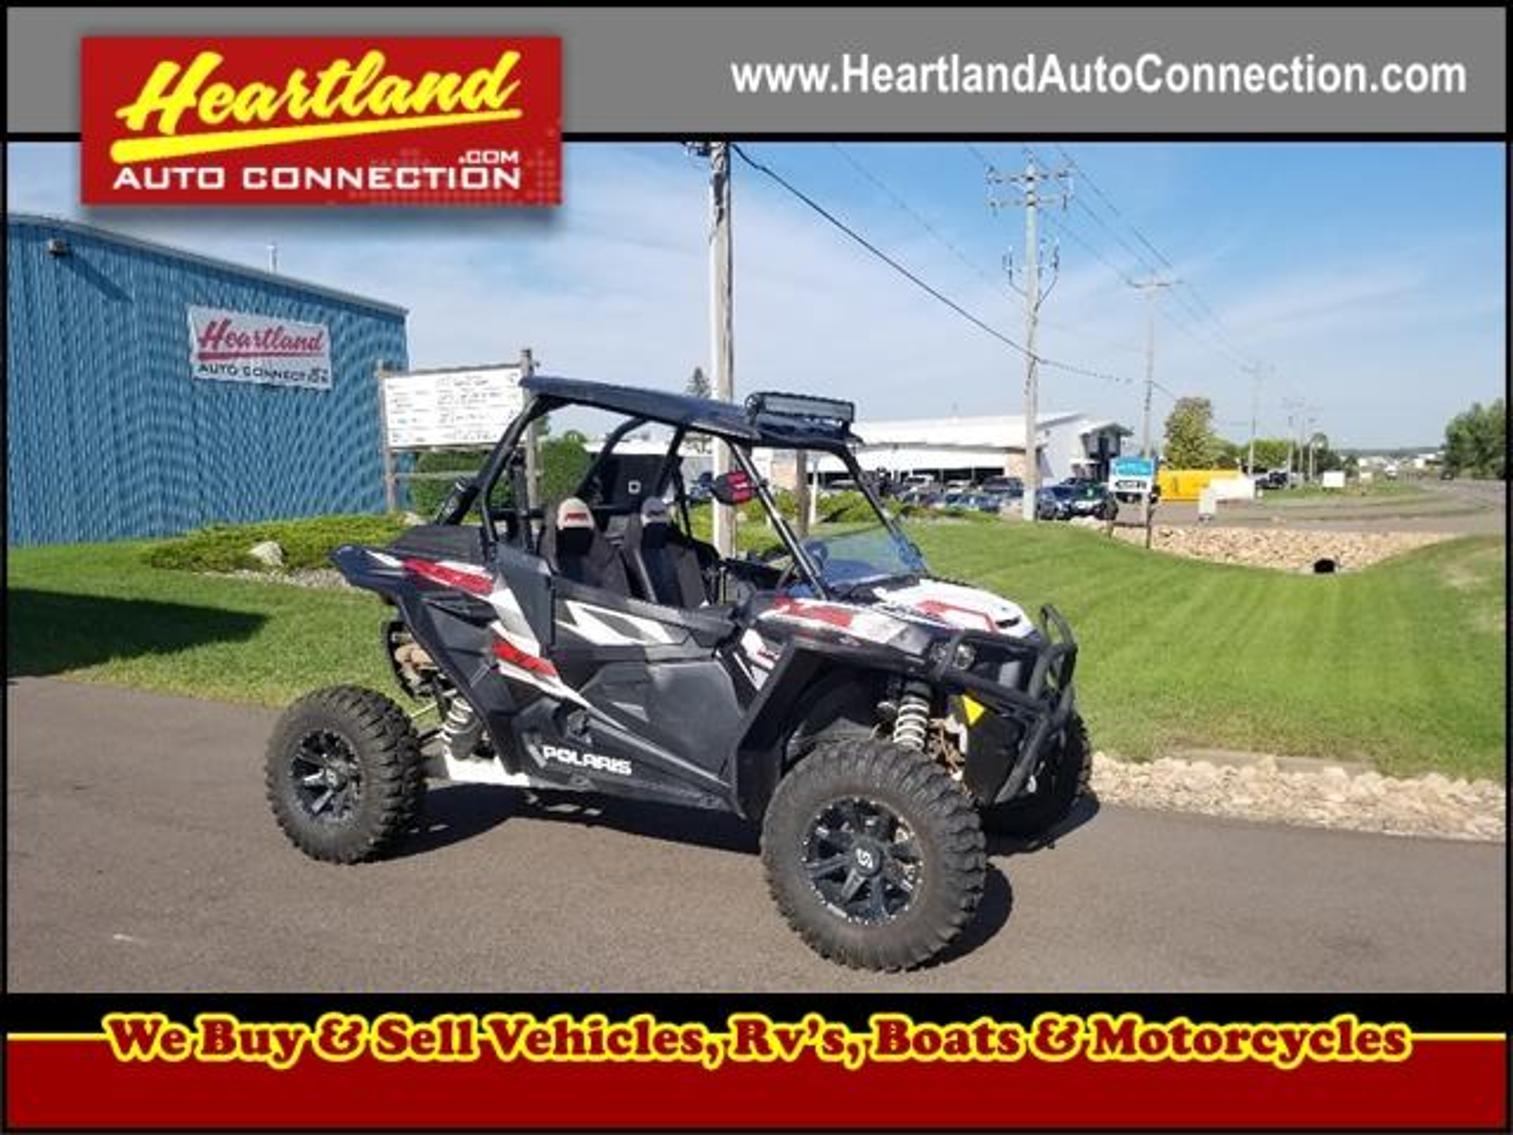 Vintage Snowmobile Auction & Classic Cars, Motorcycles, and UTV's